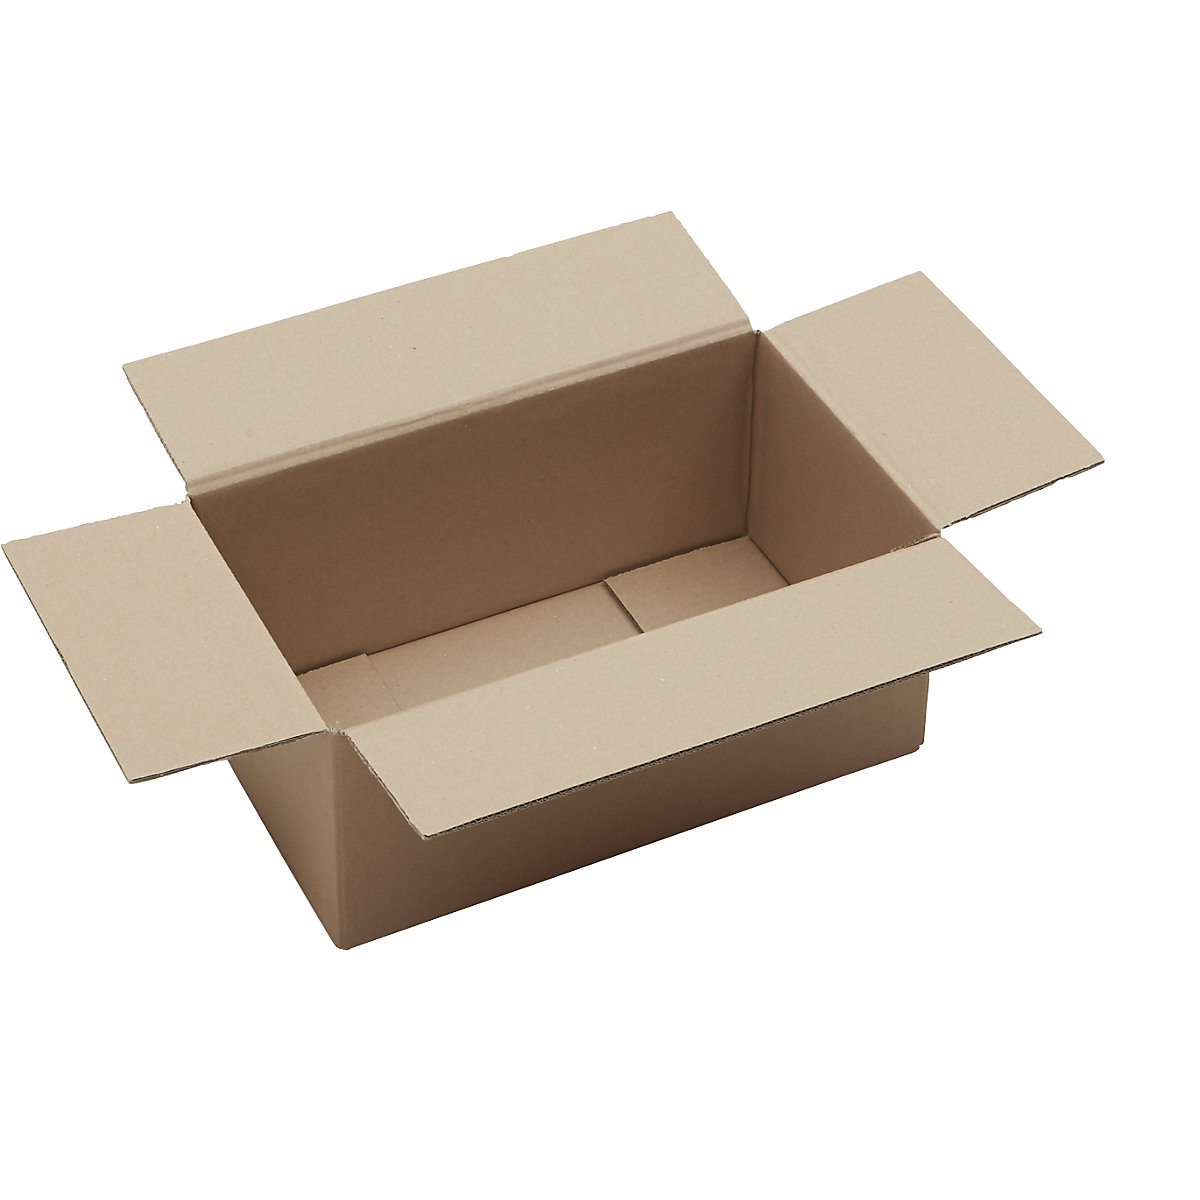 Corrugated cardboard folding boxes, FEFCO 0201, double fluted, pack of 50, internal dimensions 350 x 200 x 150 mm-3